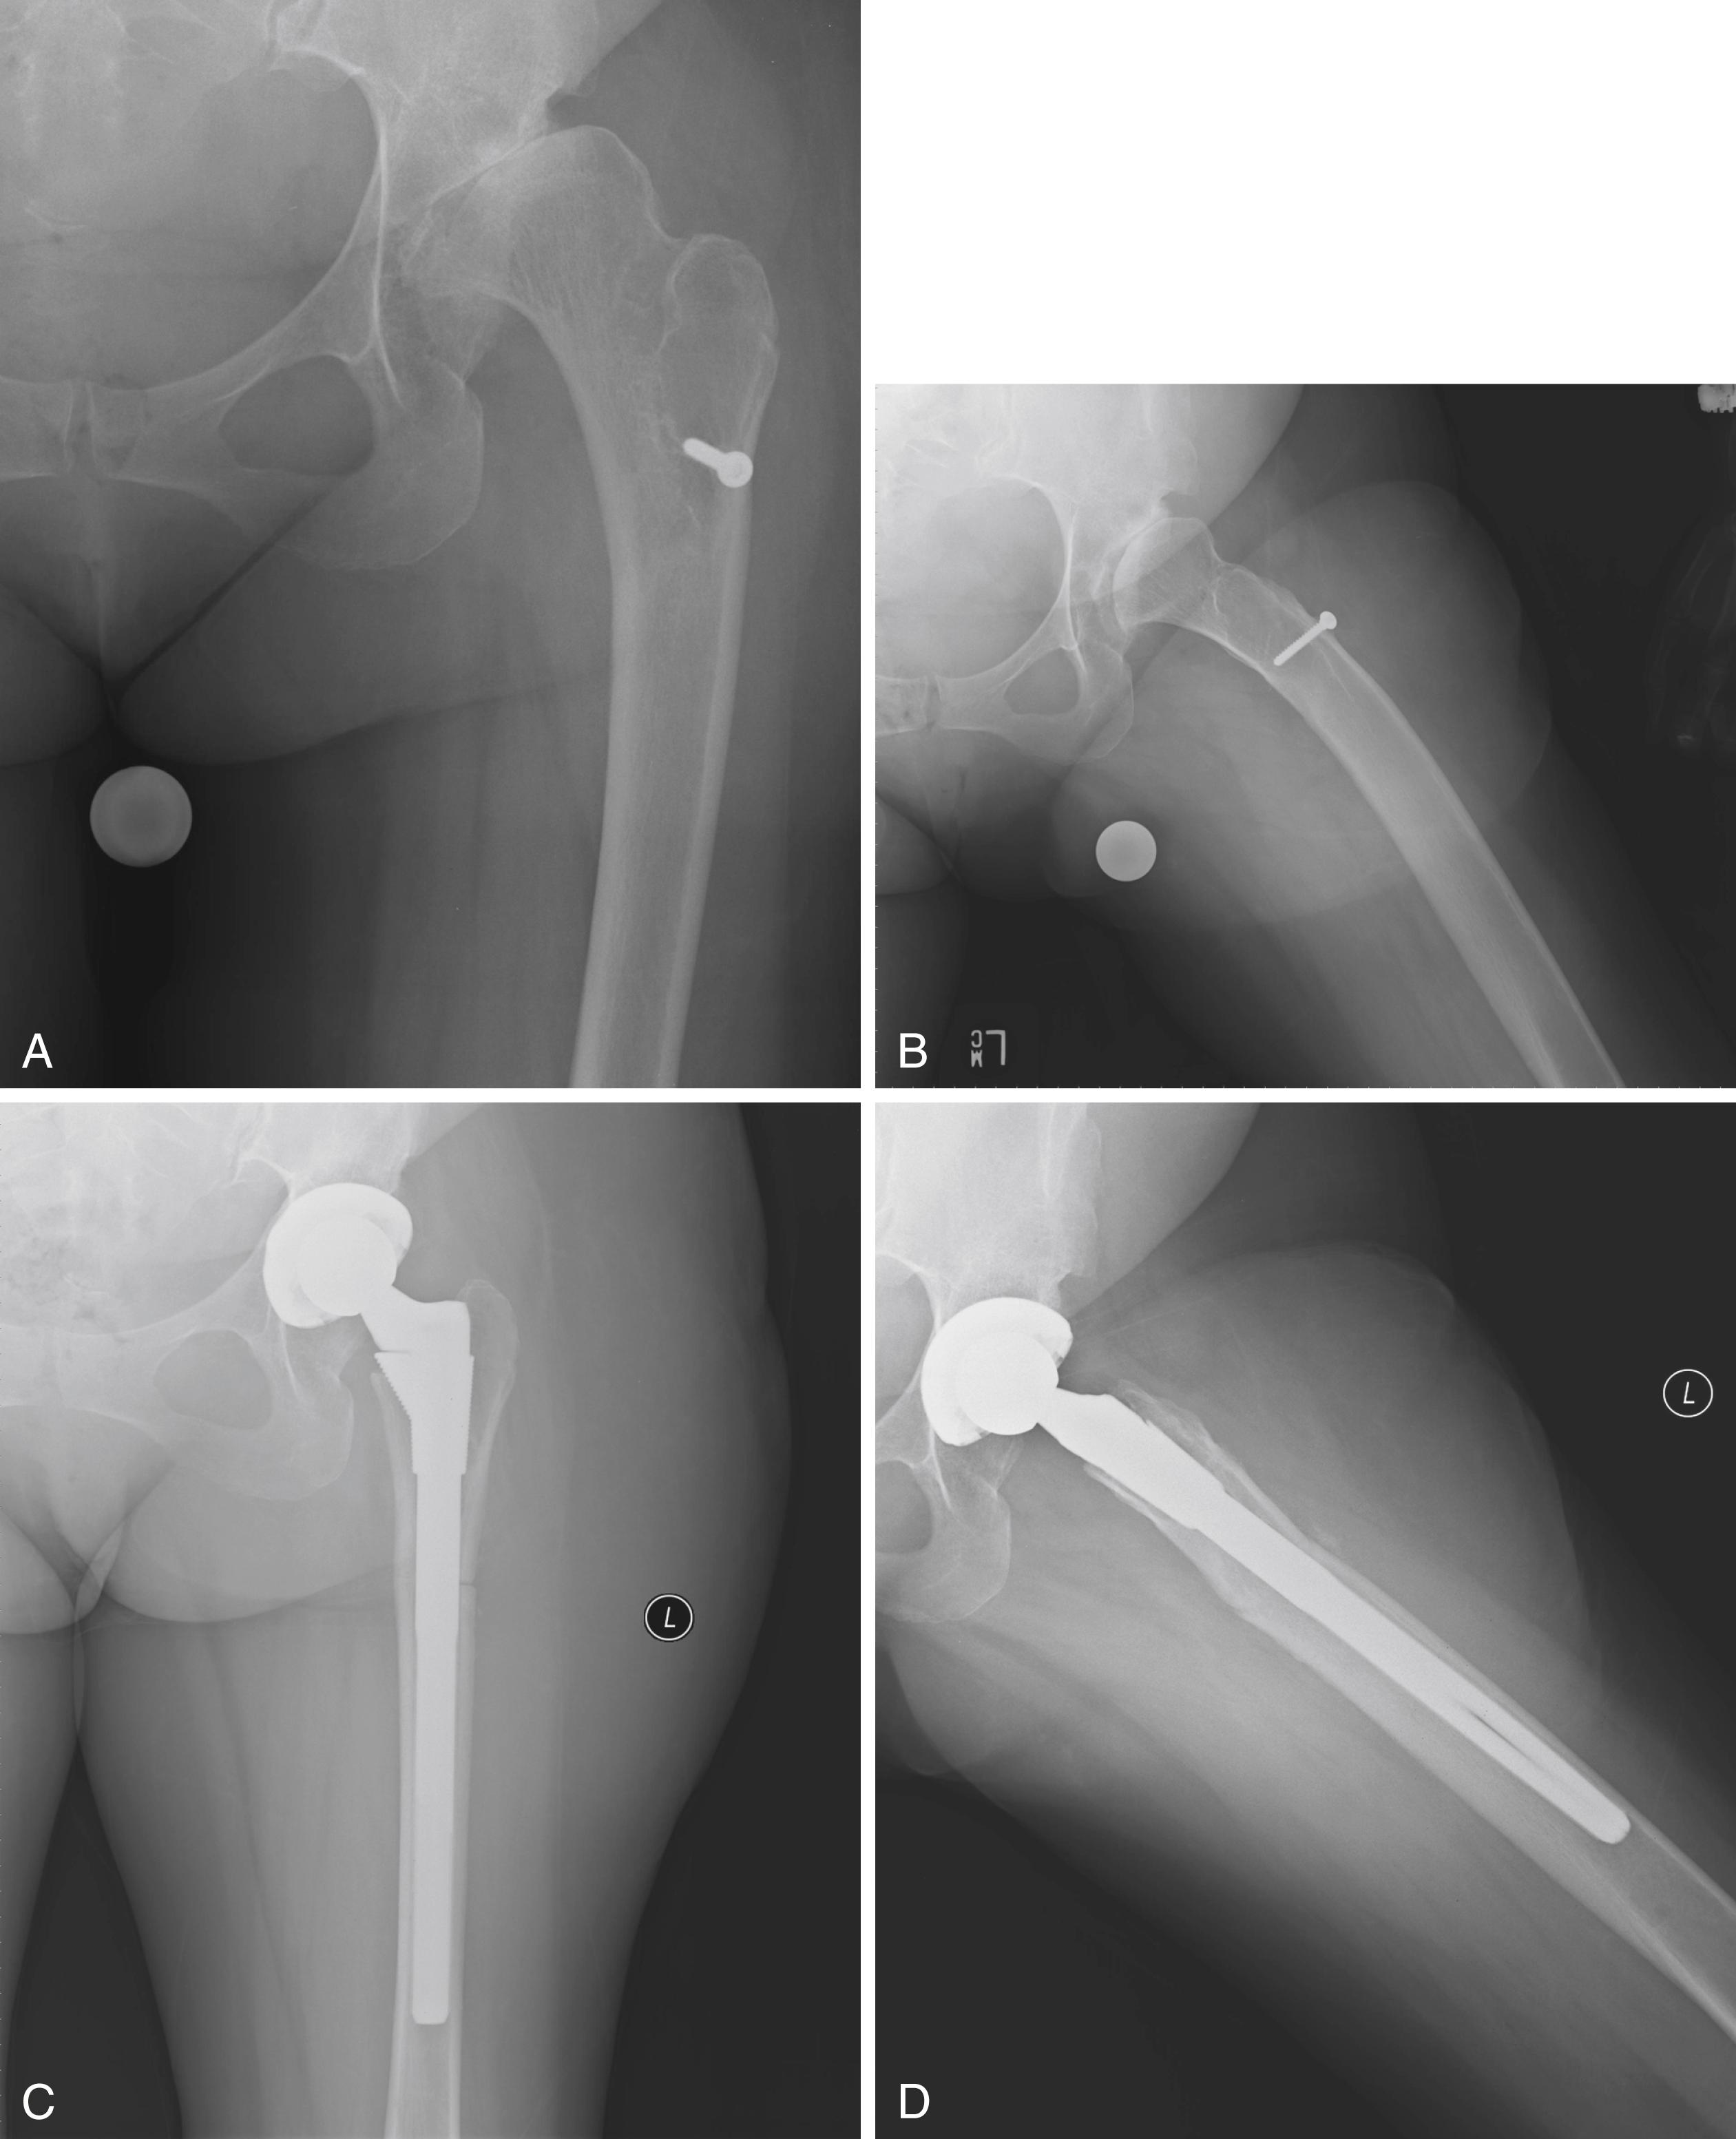 FIGURE 3.85, Developmental dysplasia. A and B, Thirty-year-old woman with prior femoral and acetabular osteotomies. There is residual Crowe type 1 dysplasia. Femur is excessively anteverted with anterior bow and retained hardware. C and D, Small acetabular component placed at level of true acetabulum. Femoral osteotomy was needed to correct angular and rotational deformities.